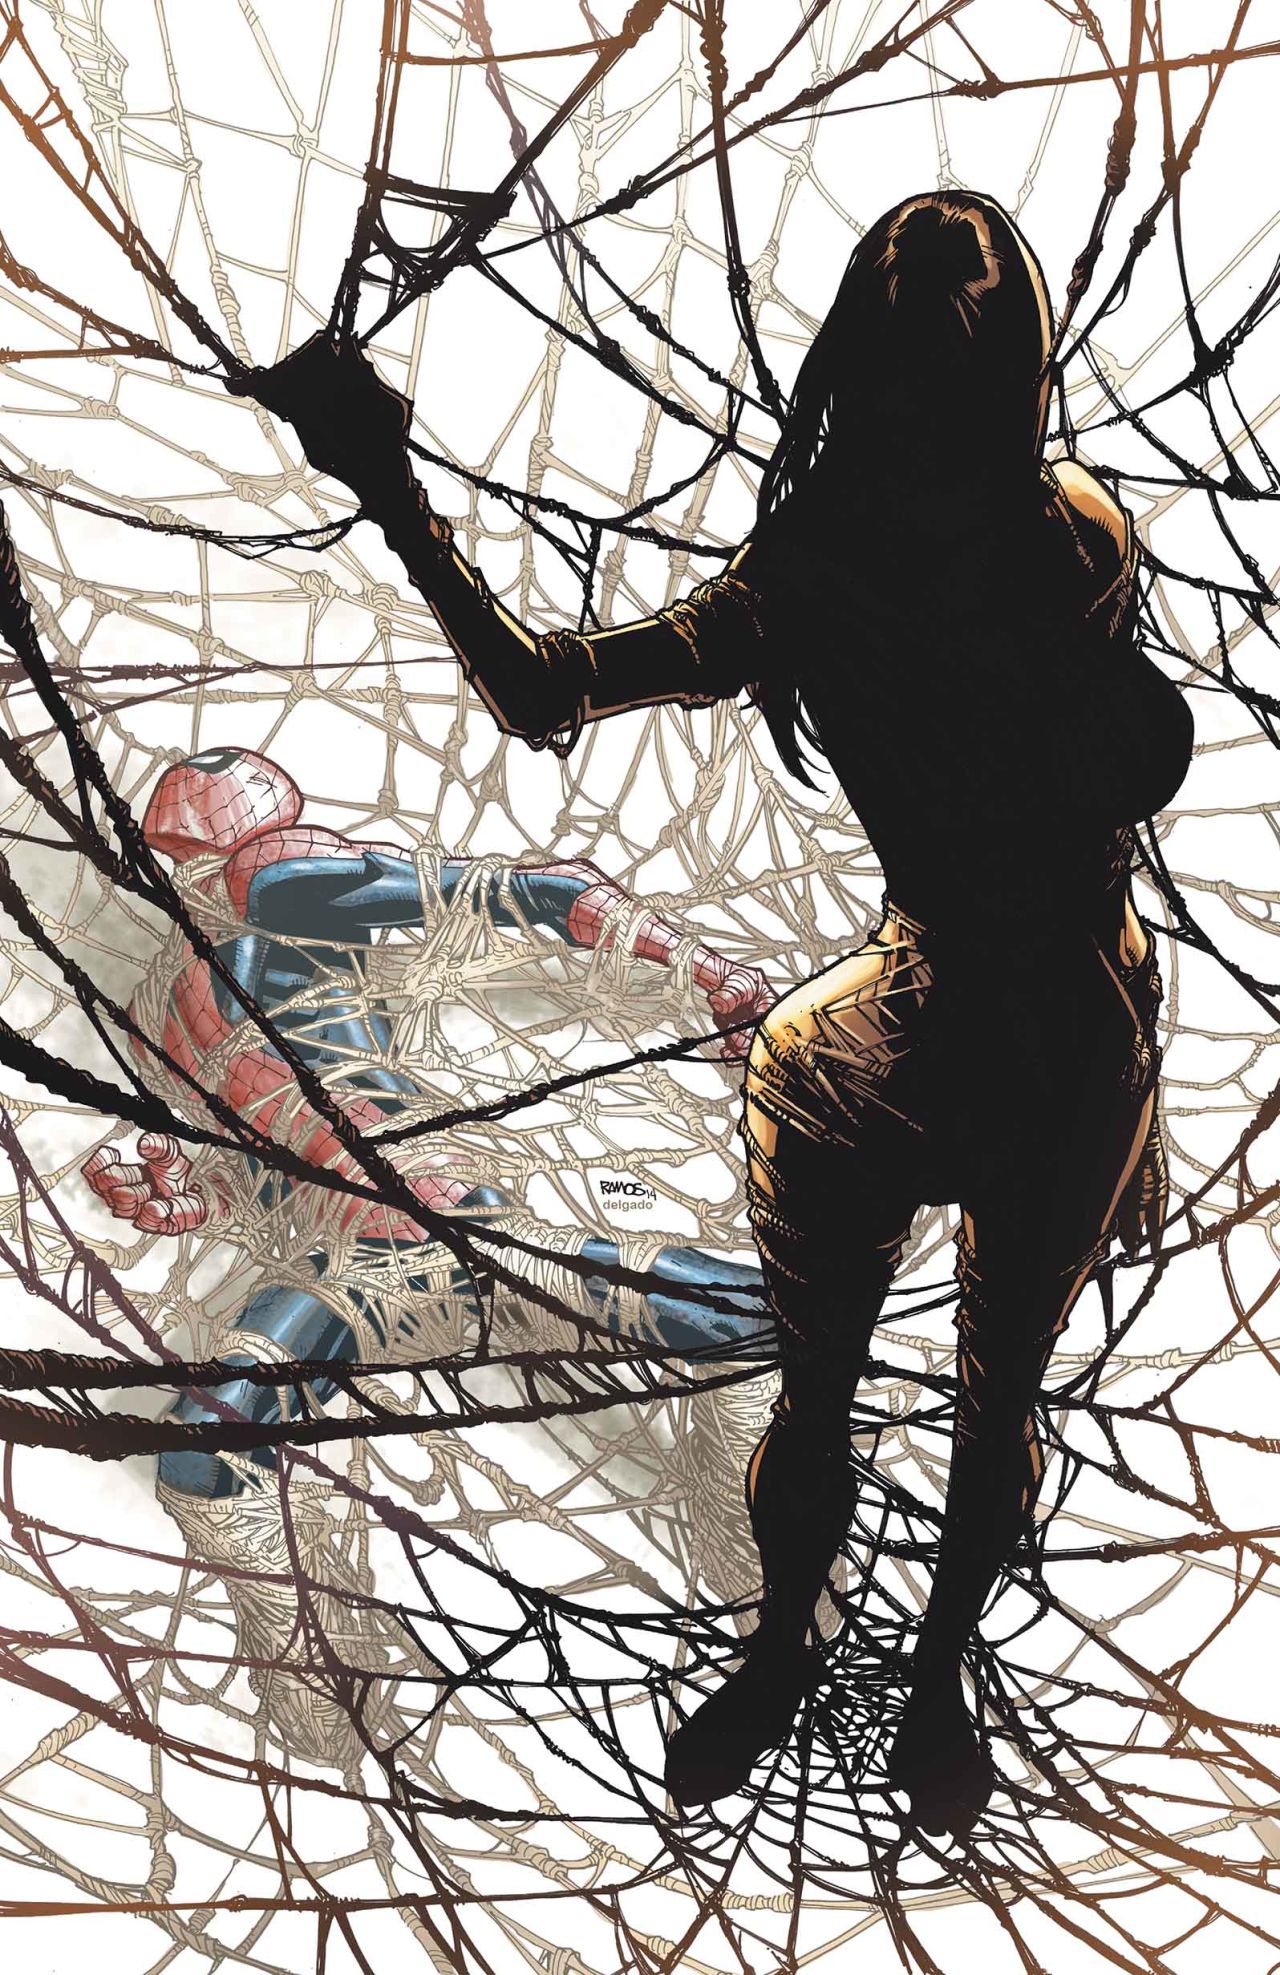 The cover of "Amazing Spider-Man" #4 features the debut of the other person bitten by that spider, Silk.